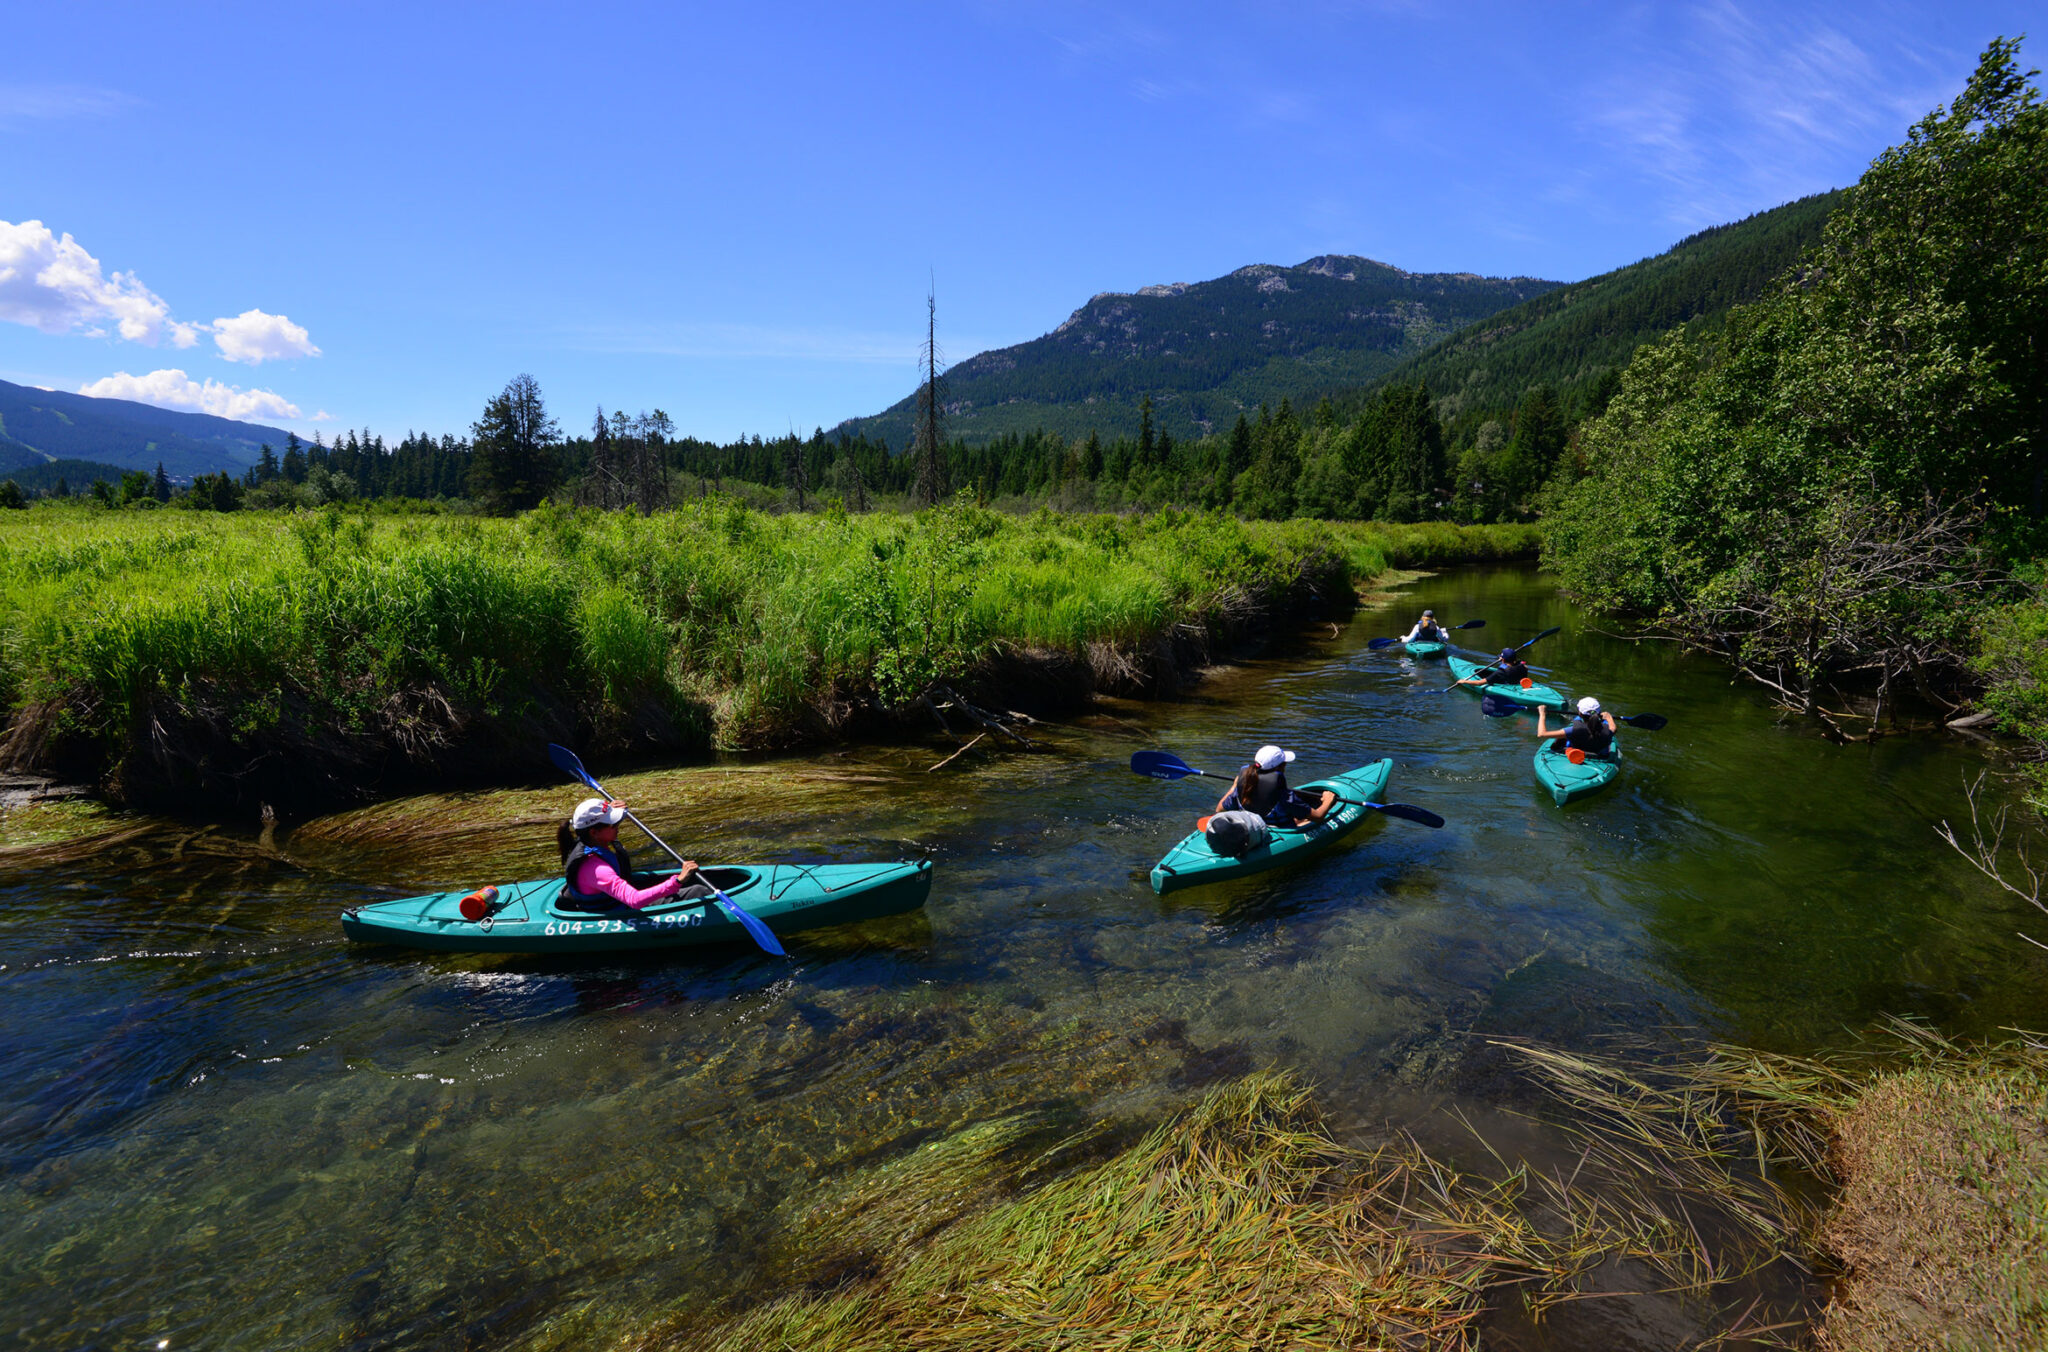 Kayakers follow their guide down the River of Golden Dreams in Whistler on a Bike & Boat tour.